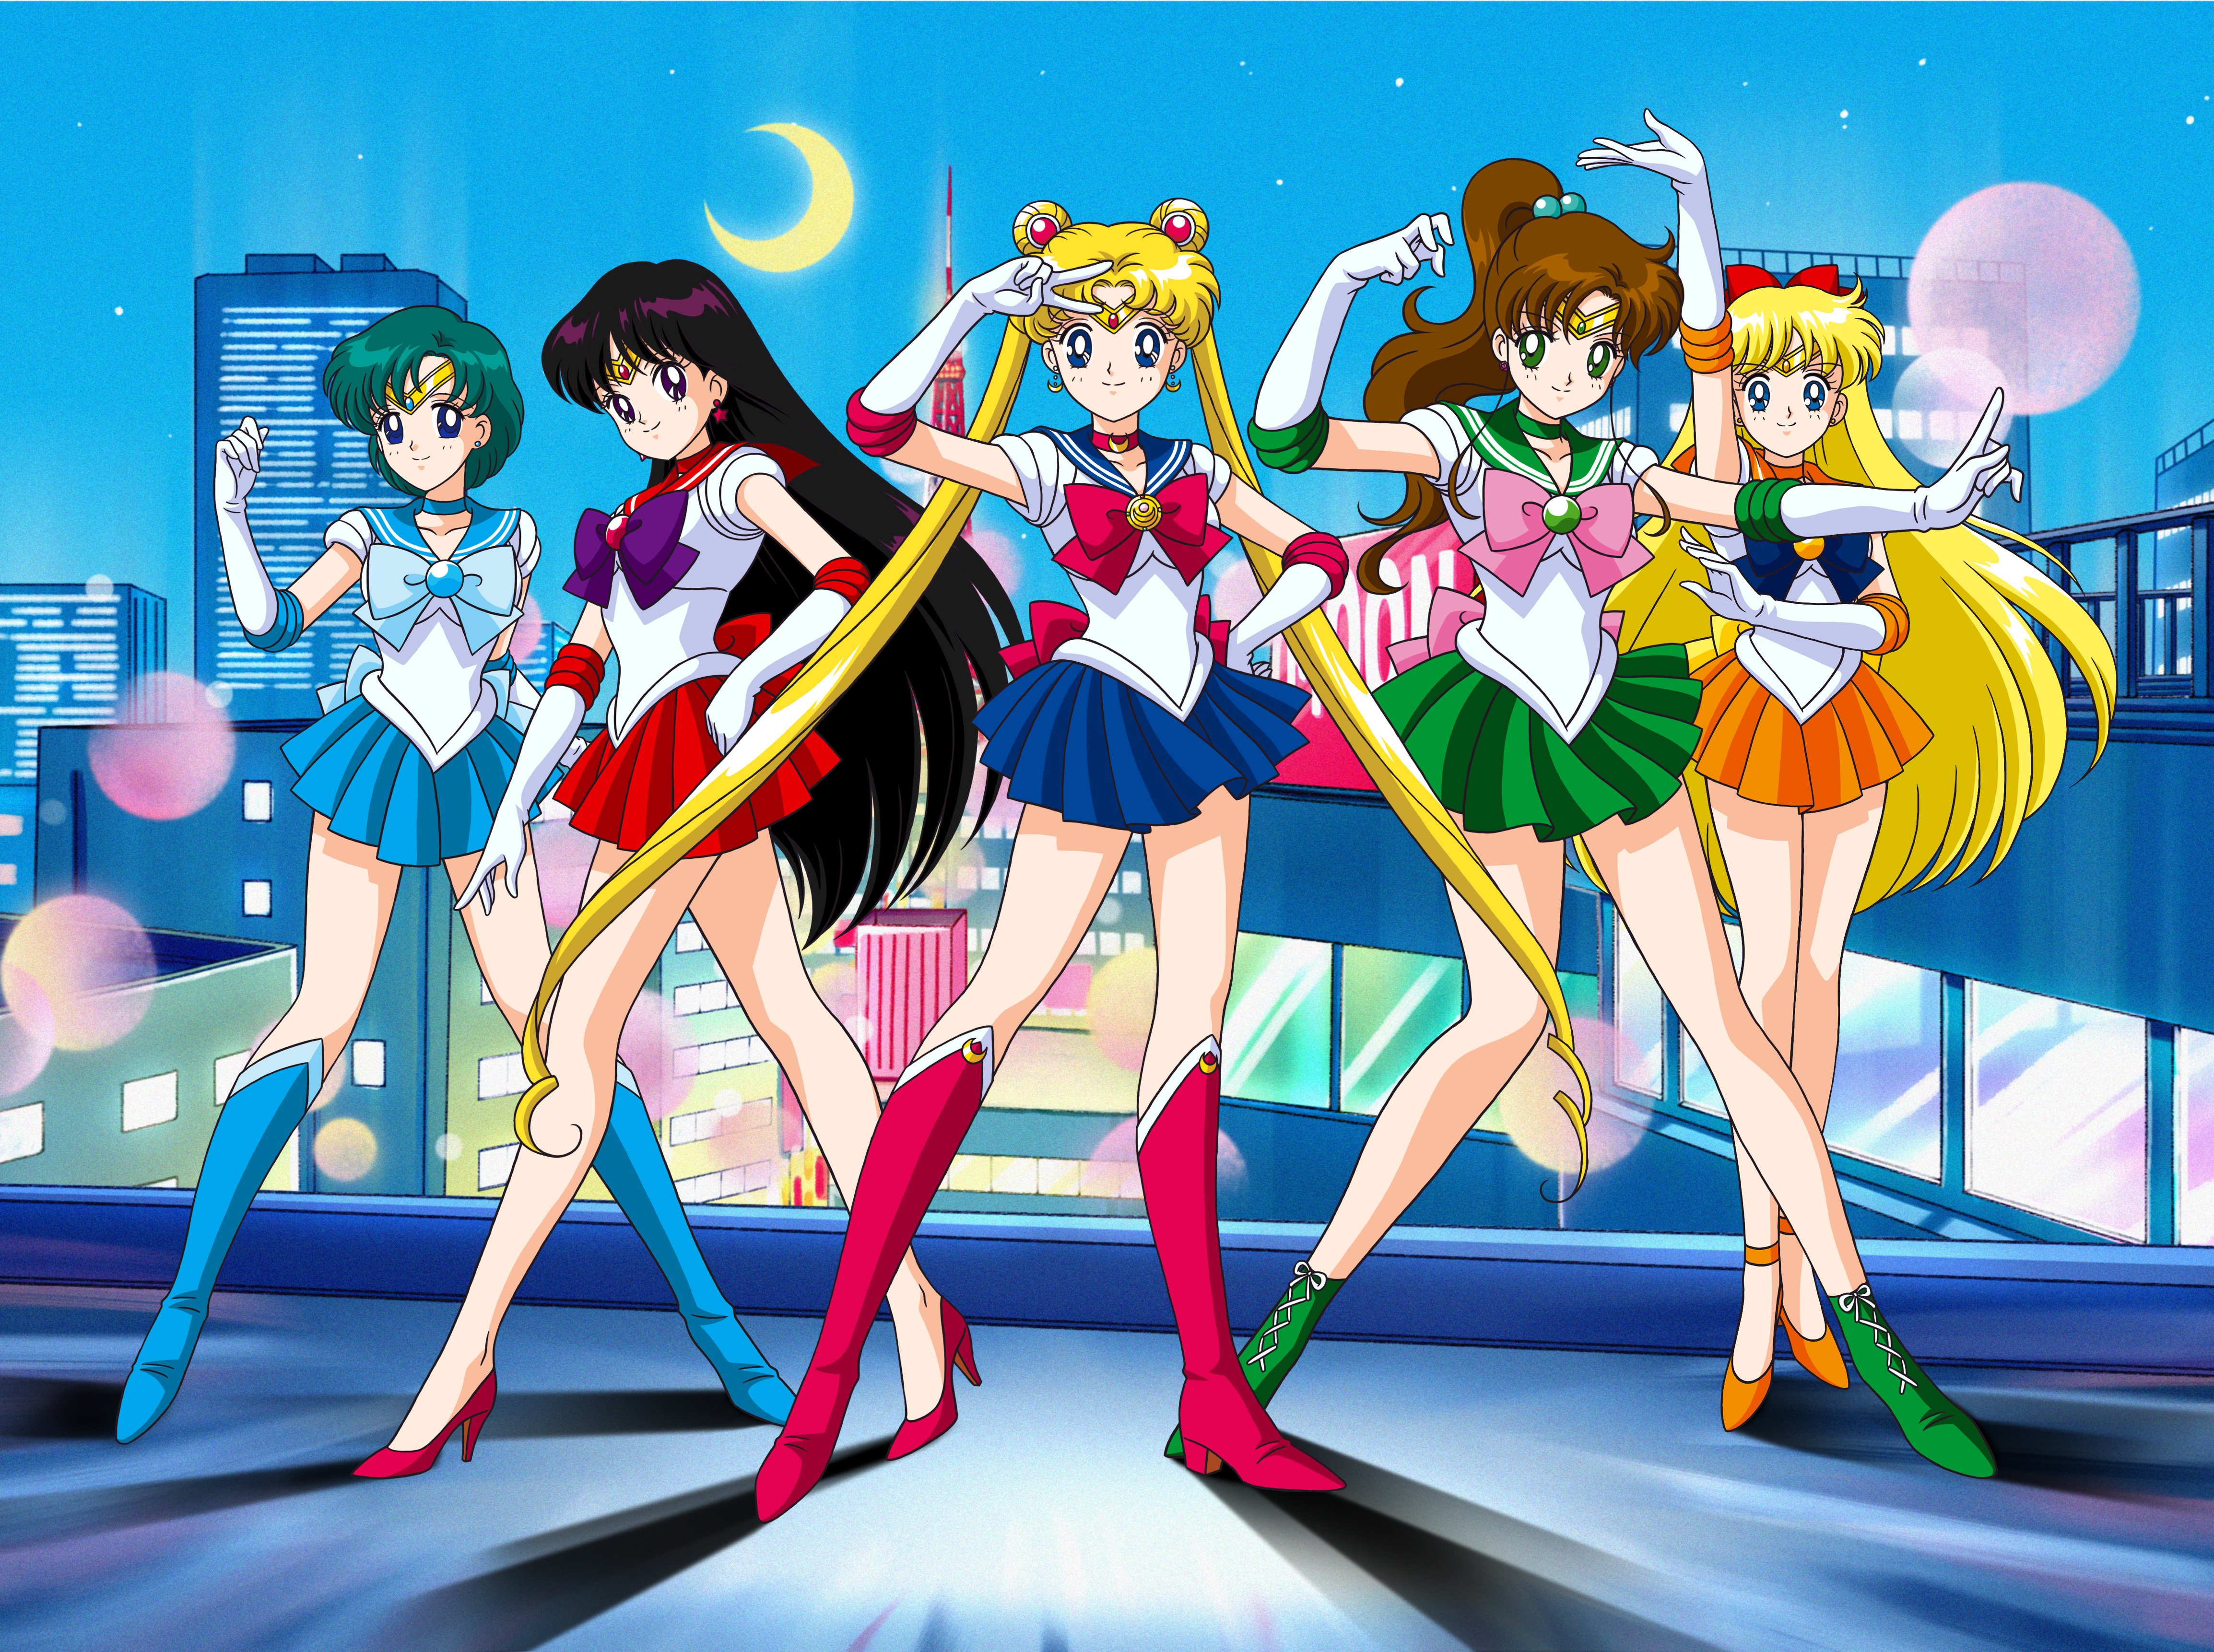 A History Of Sailor Moon Anime Part 1 Made In Japan The Mary Sue Sailor moon is a japanese shojo manga series written and illustrated by naoko takeuchi. the mary sue